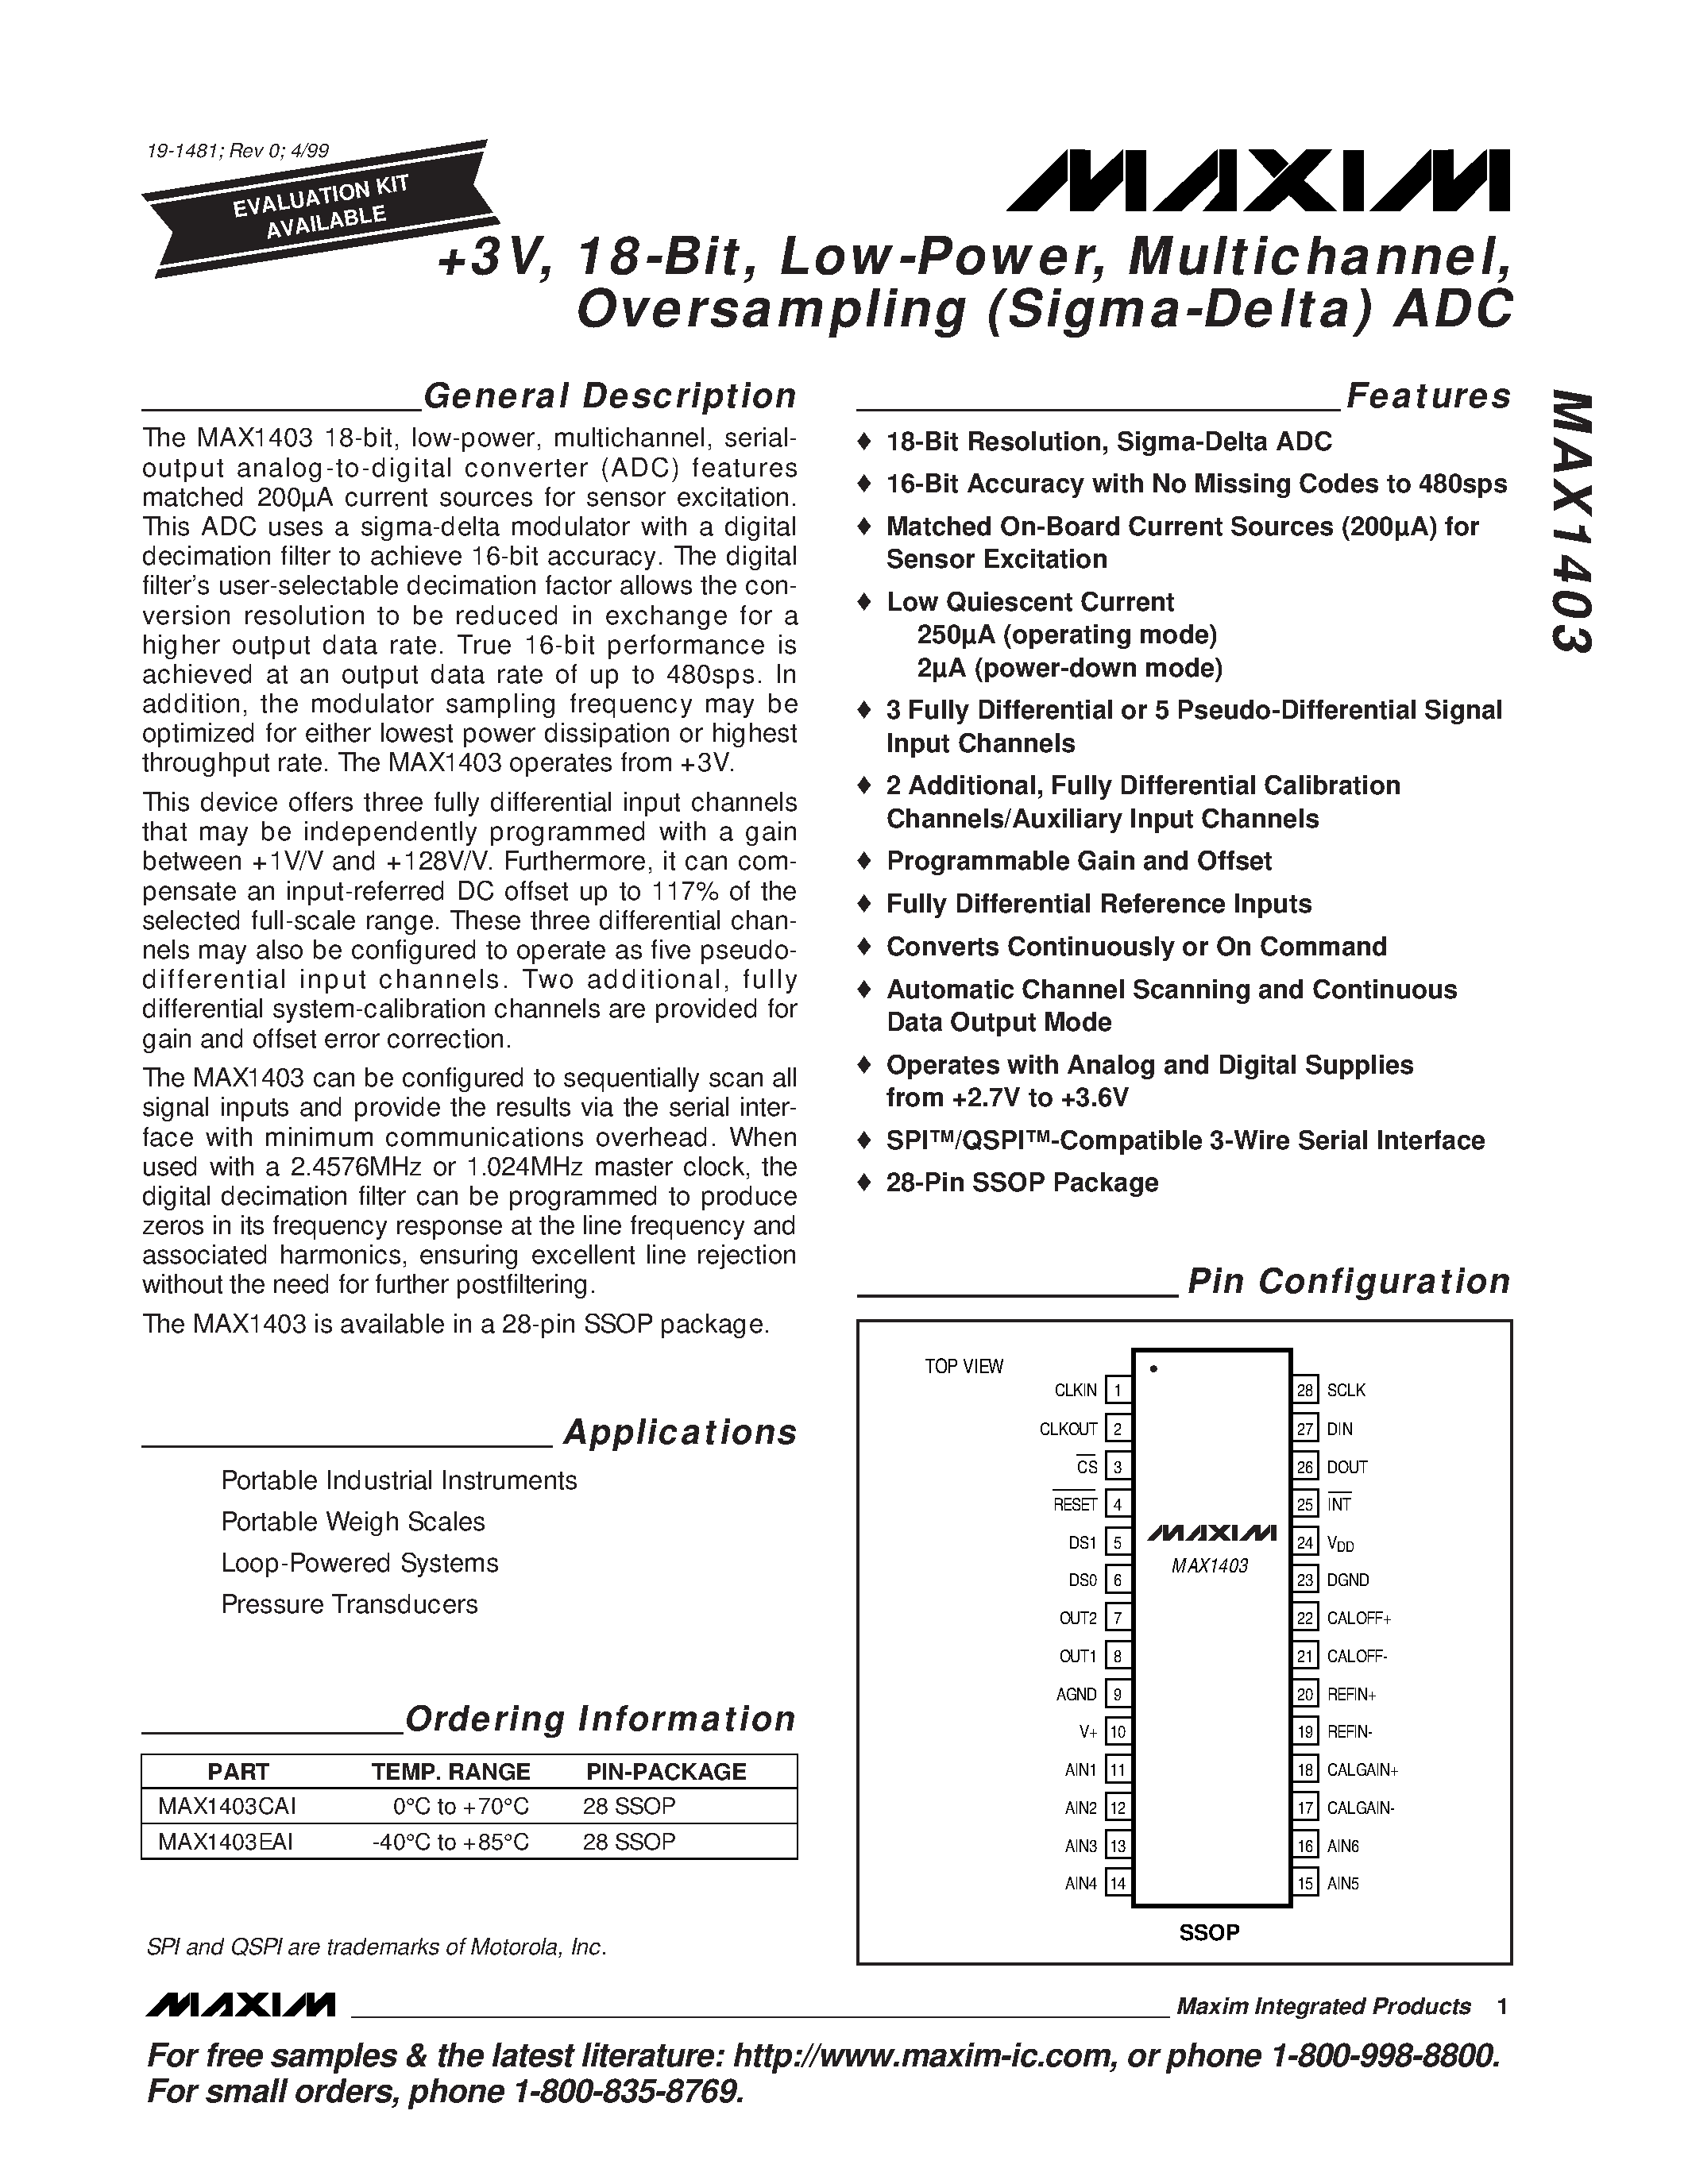 Datasheet MAX1403CAI - +3V / 18-Bit / Low-Power / Multichannel / Oversampling Sigma-Delta ADC page 1